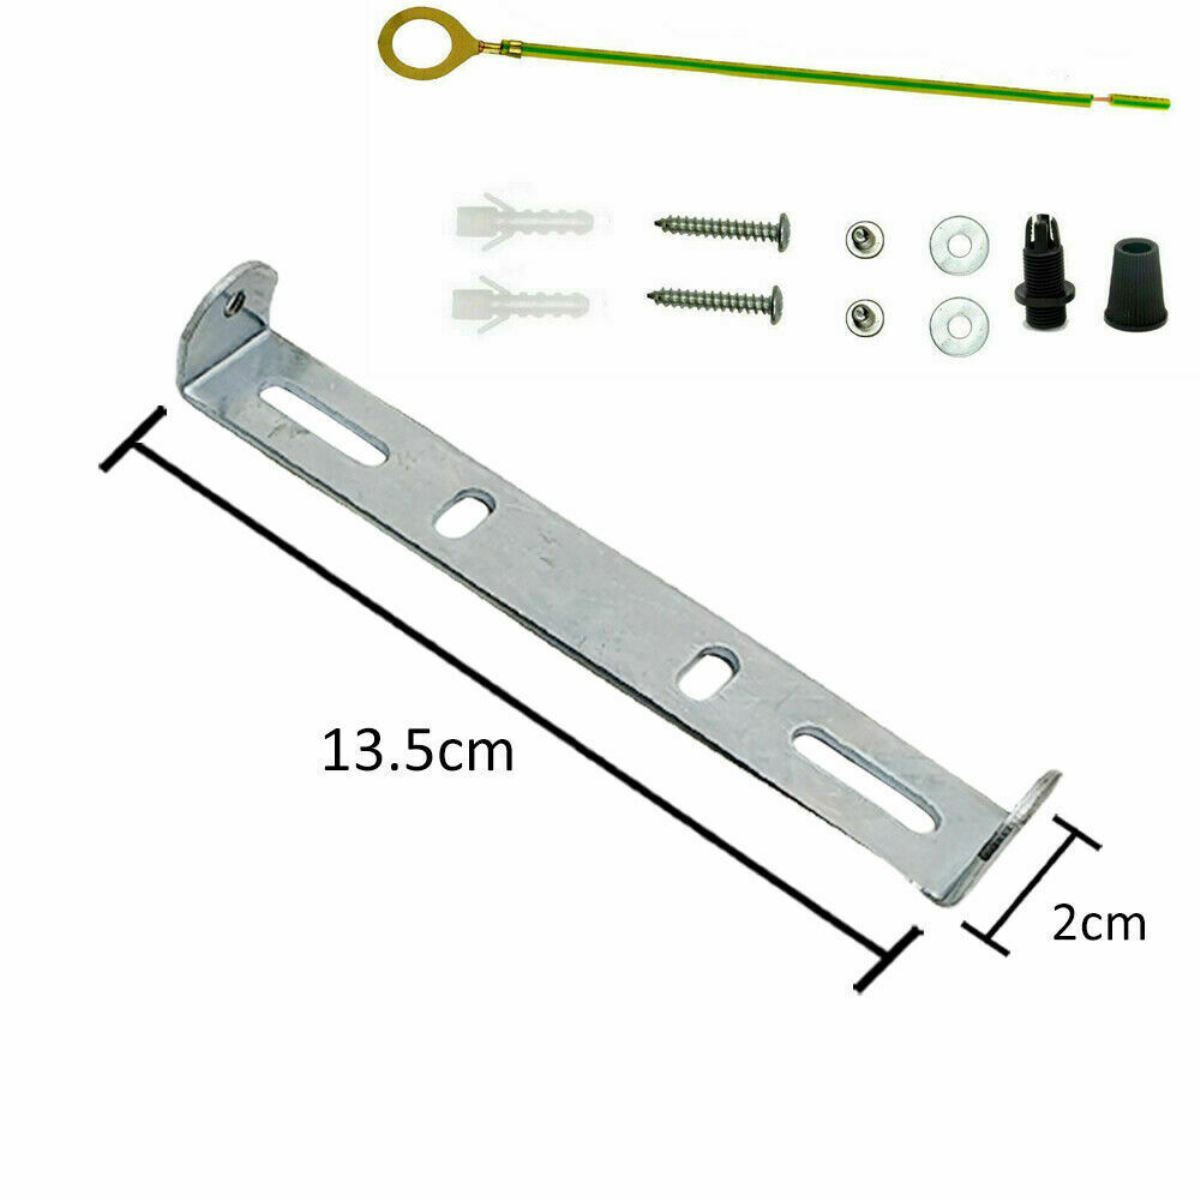 135mm bracket ceiling rose Light Fixing strap brace Plate with accessories - Shop for LED lights - Transformers - Lampshades - Holders | Relicelectrical UK